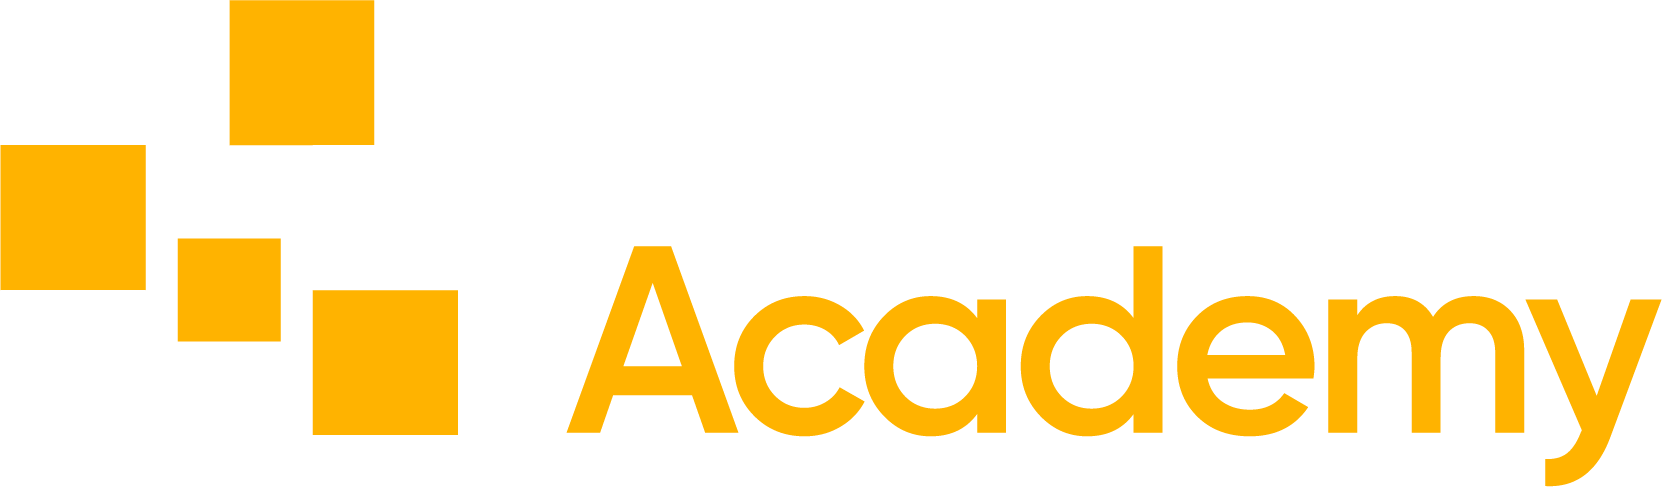 Makers Accademy